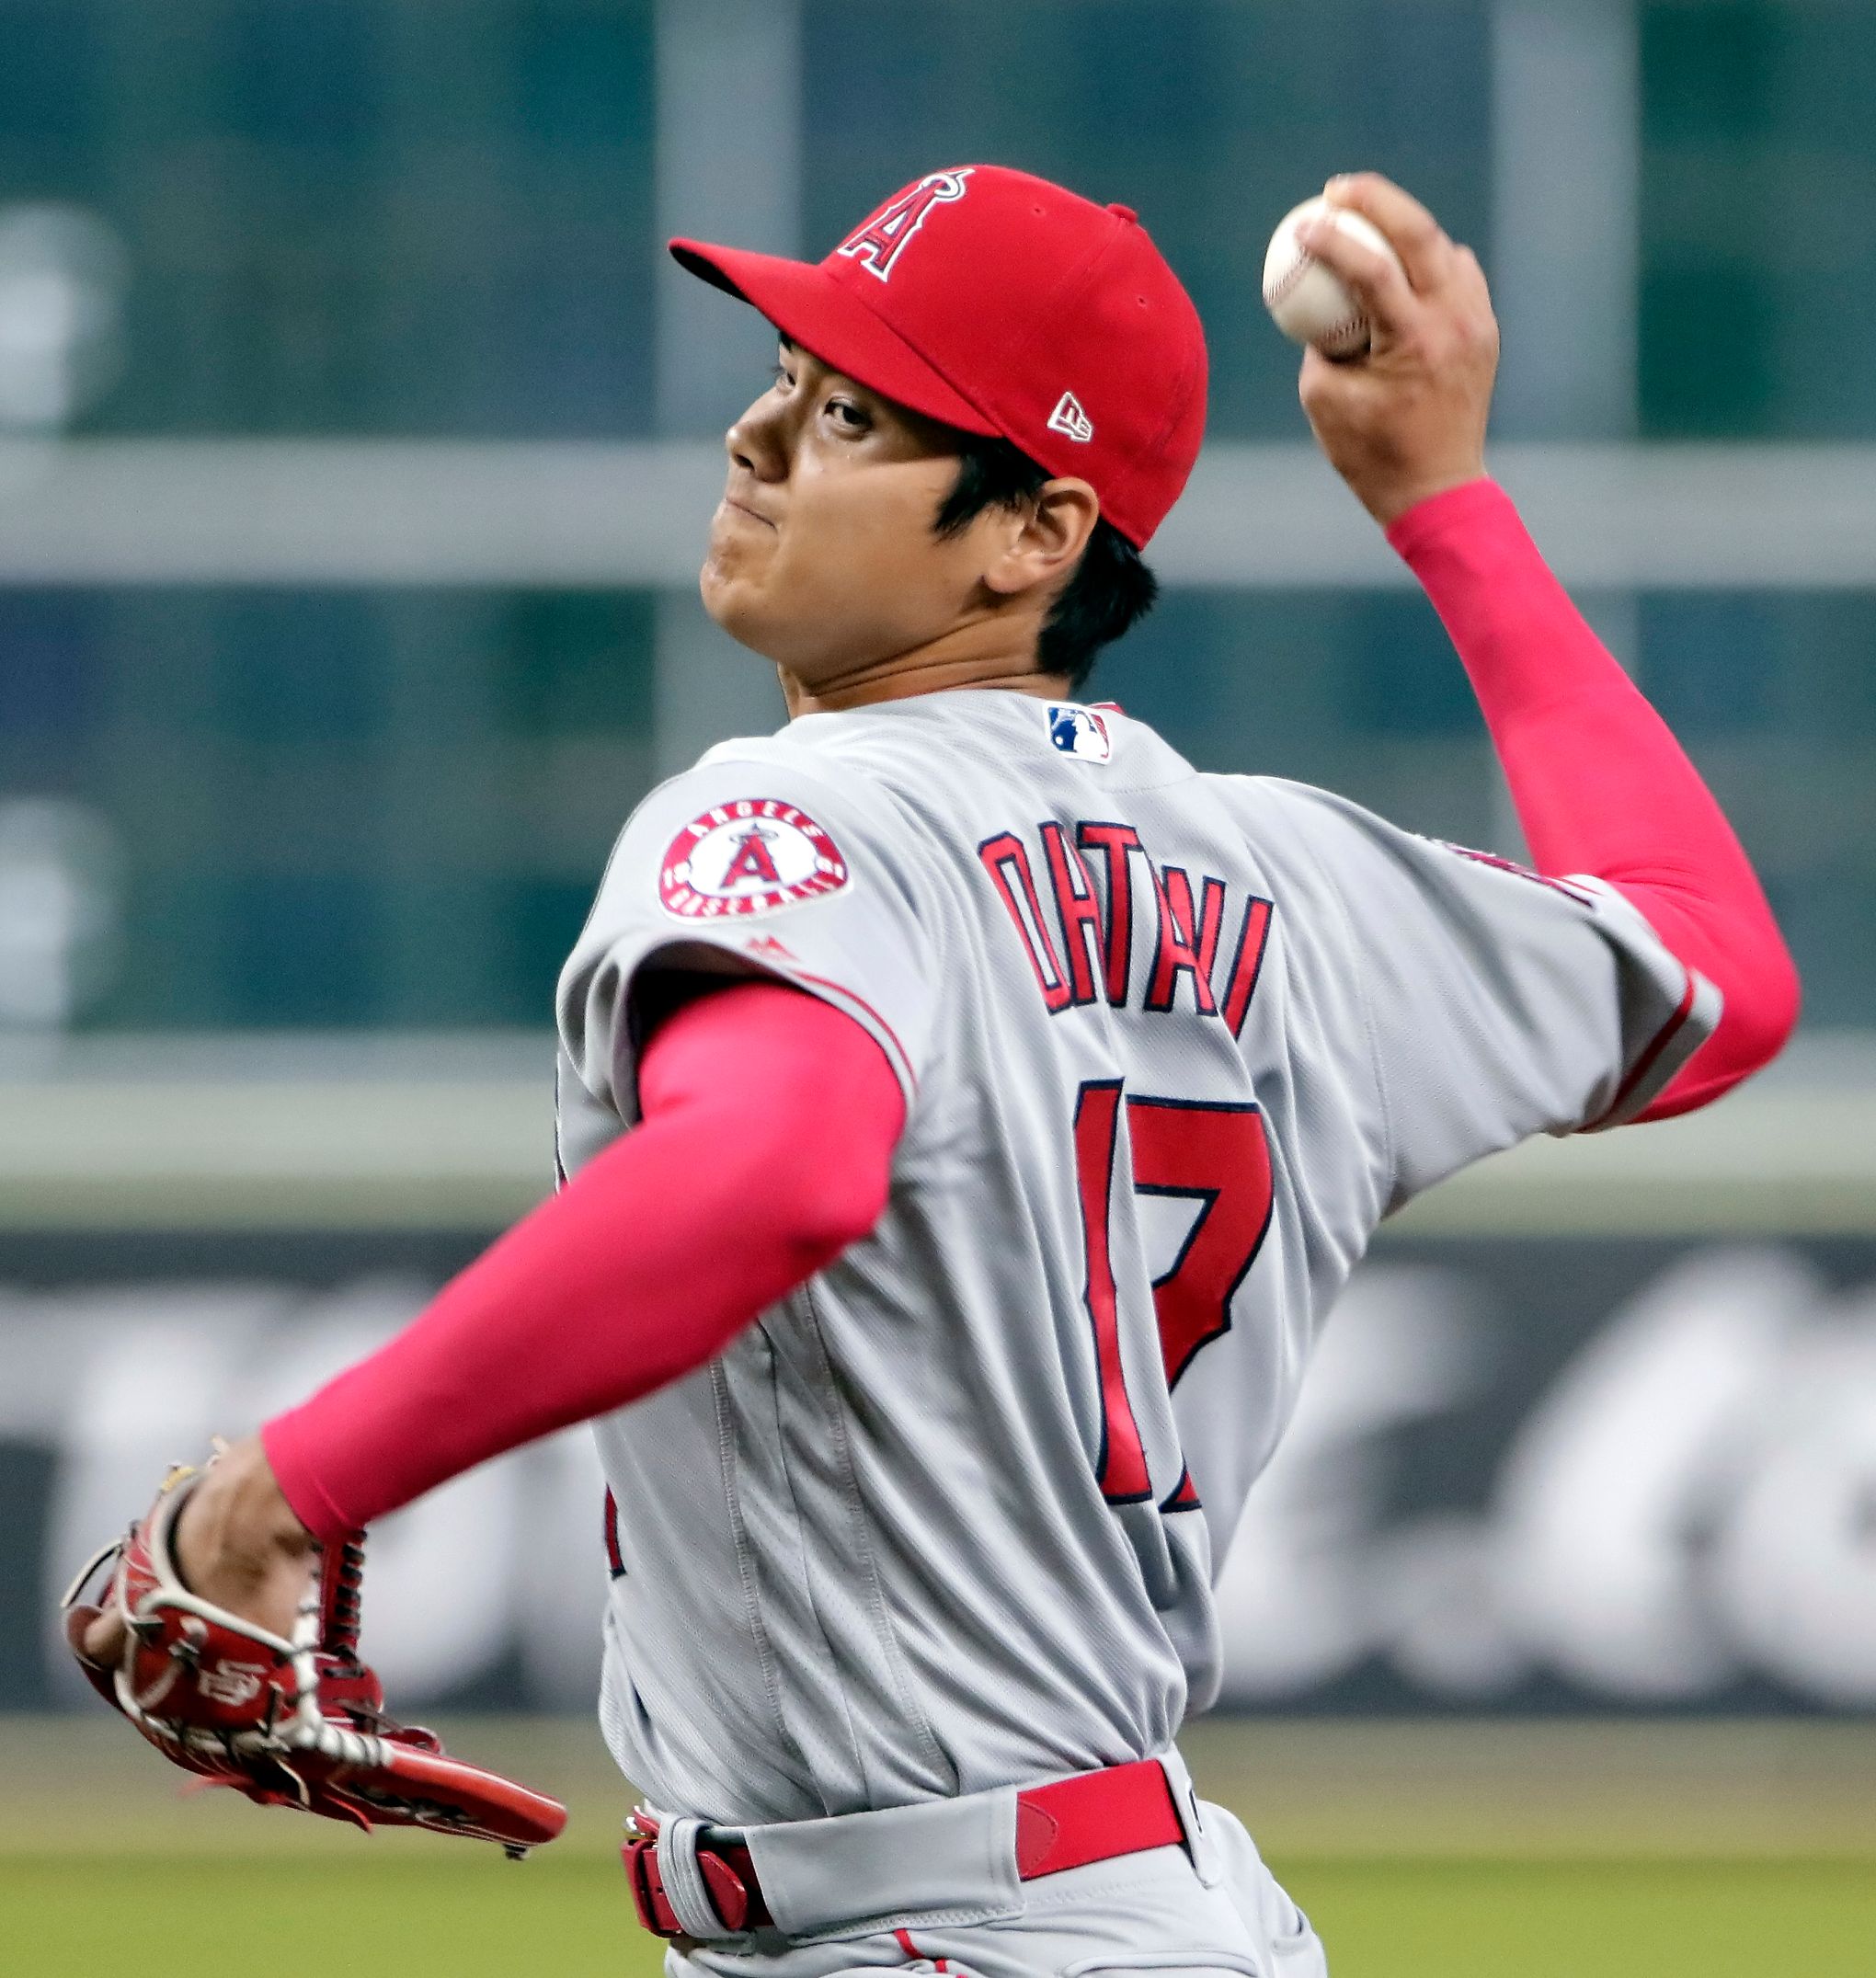 Shohei Ohtani provides LA Angels with much-needed damage control